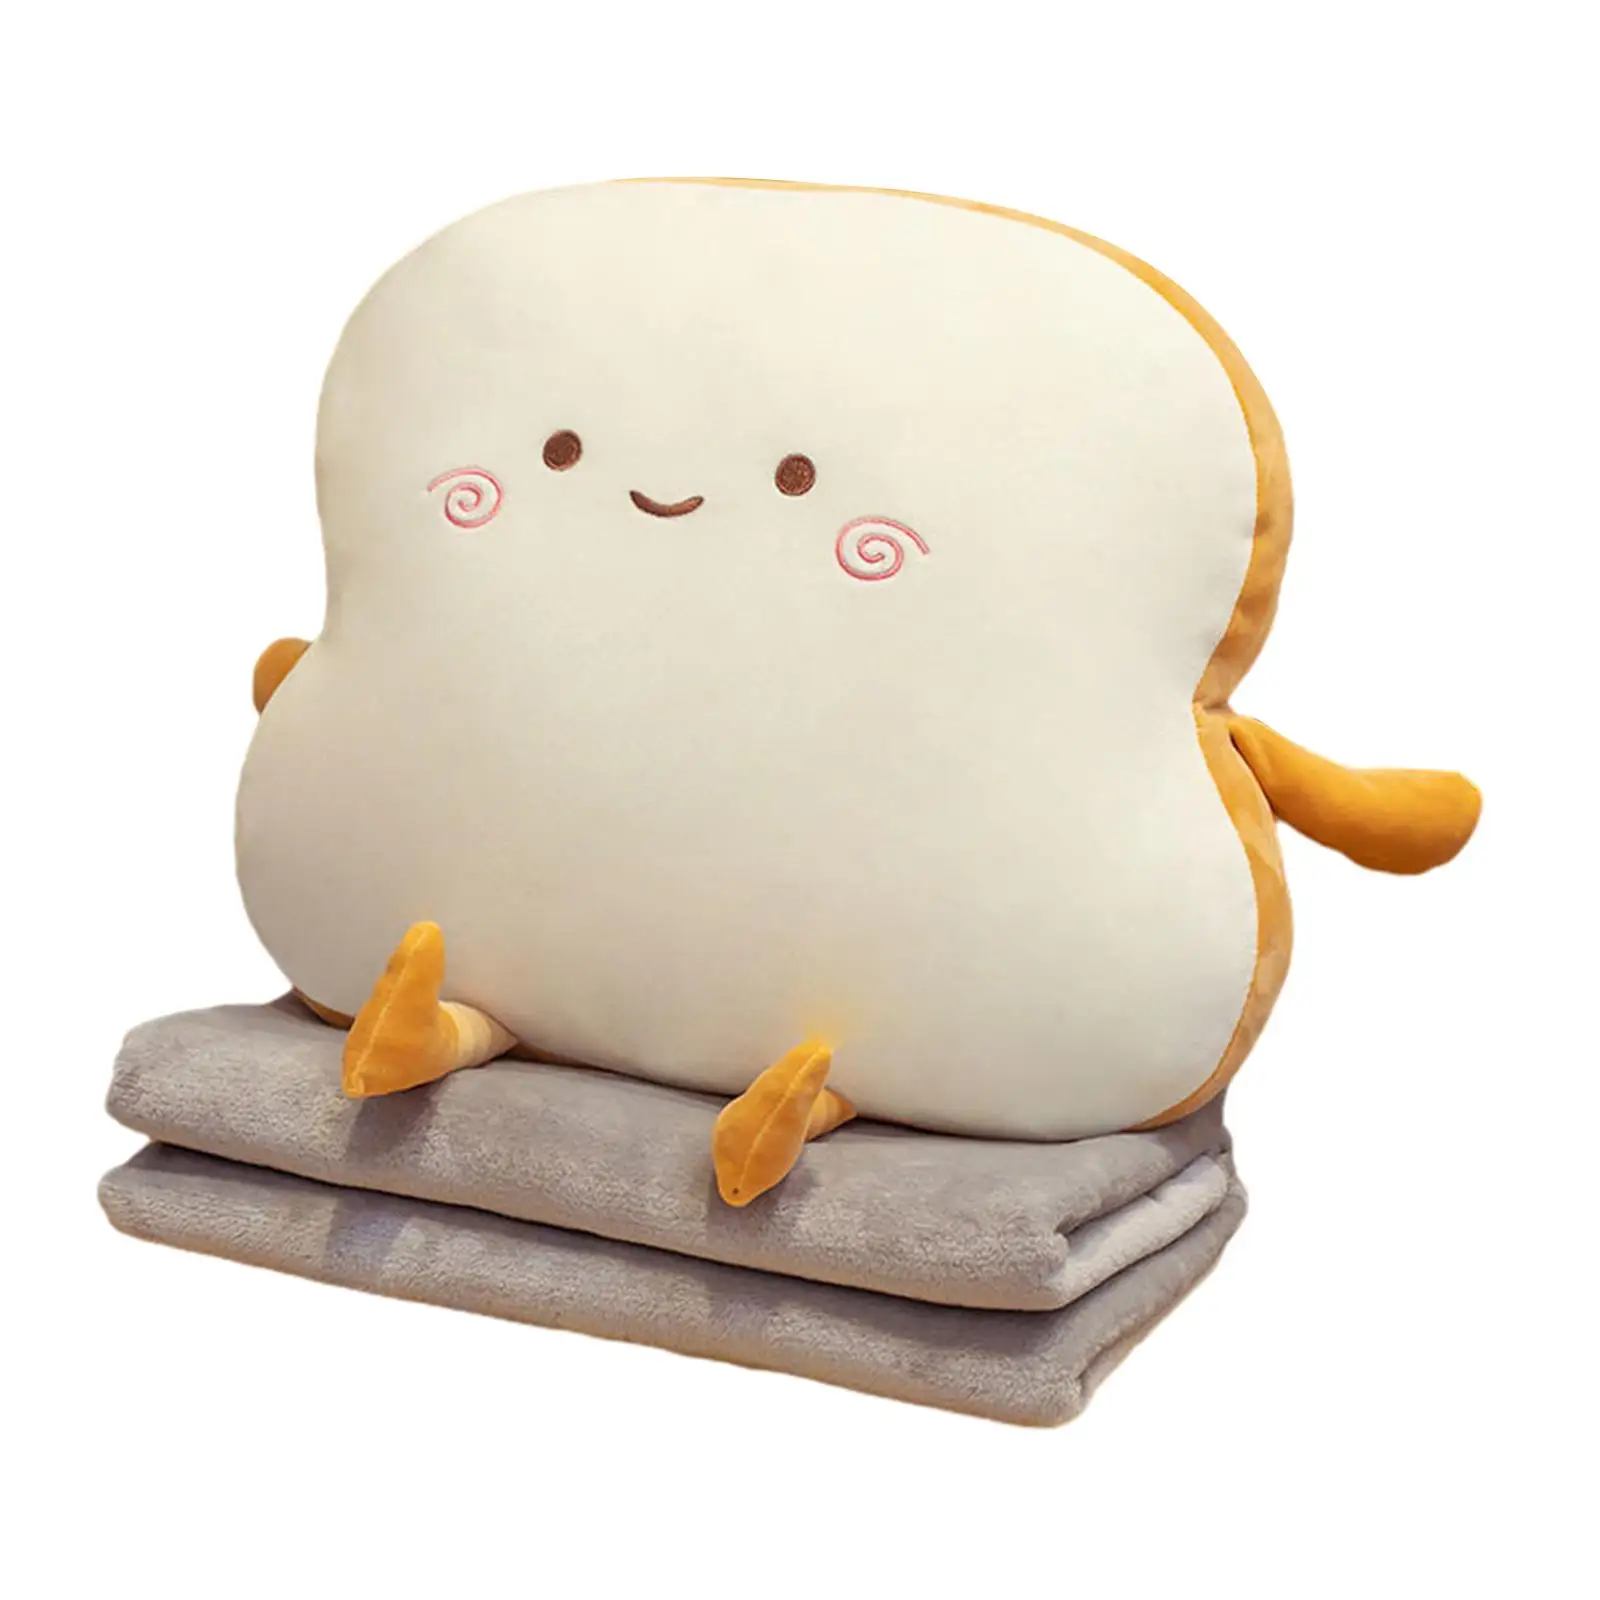 Adorable Bread Plush Pillow with Blanket Soft Sofa Pillow for Kids Room Home